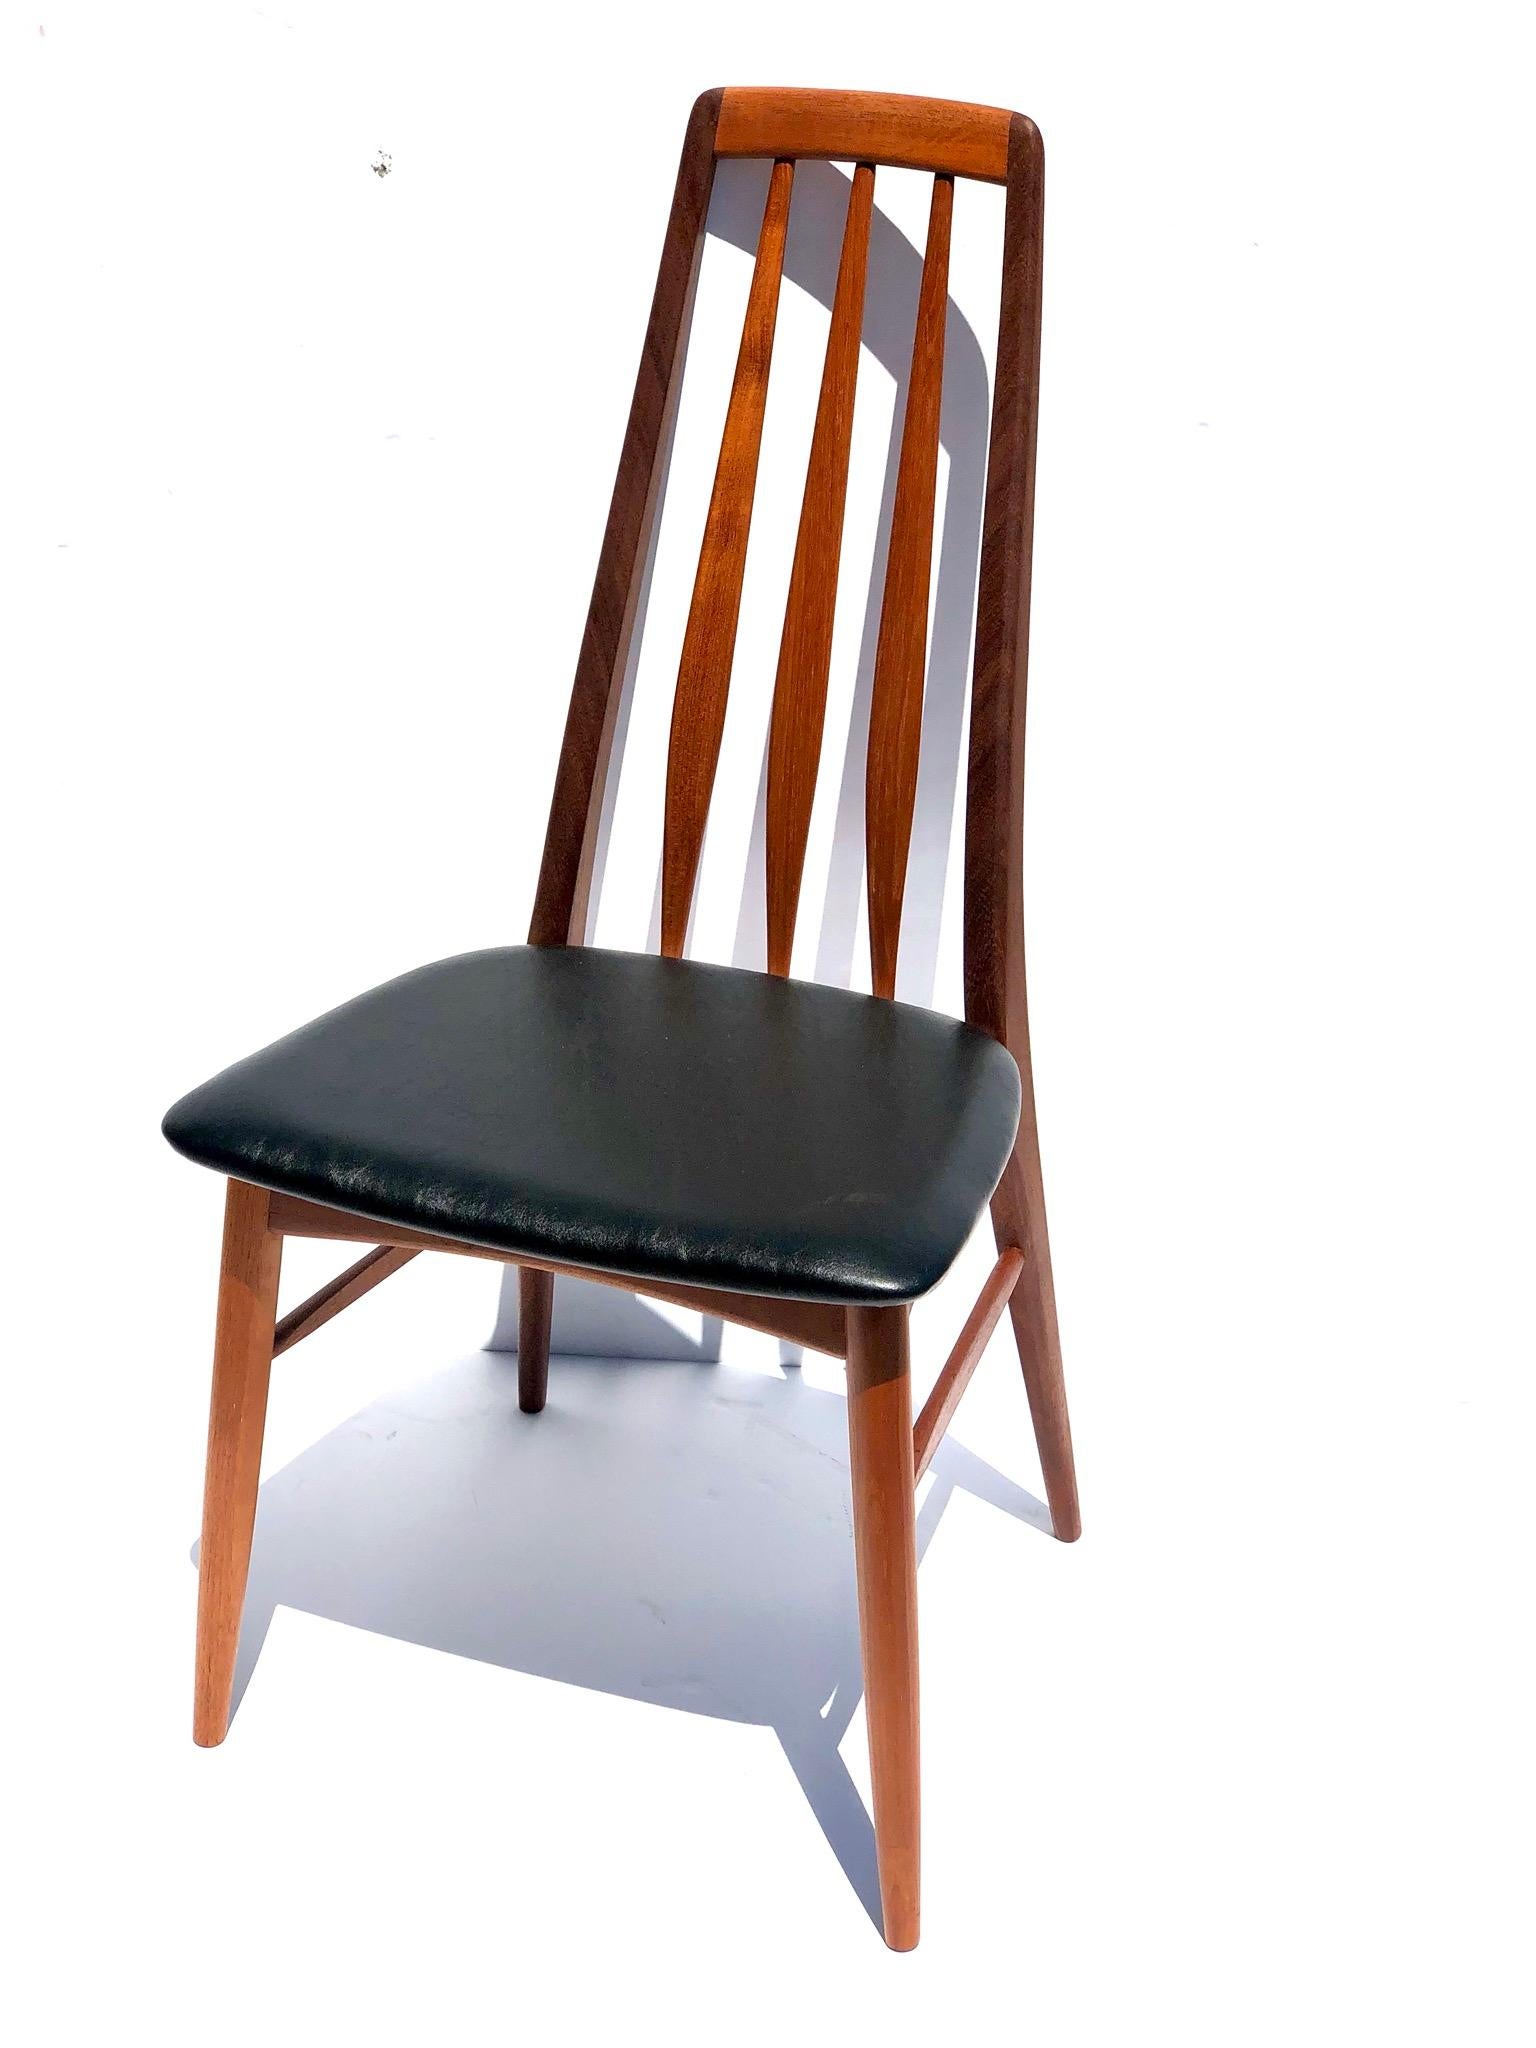 Elegant lines and beauty on this single tall back chair design by Niels Koefoed, famous Eva chair, solid teak solid and sturdy in its original black Naugahyde, stamped on the bottom with Danish control tag.